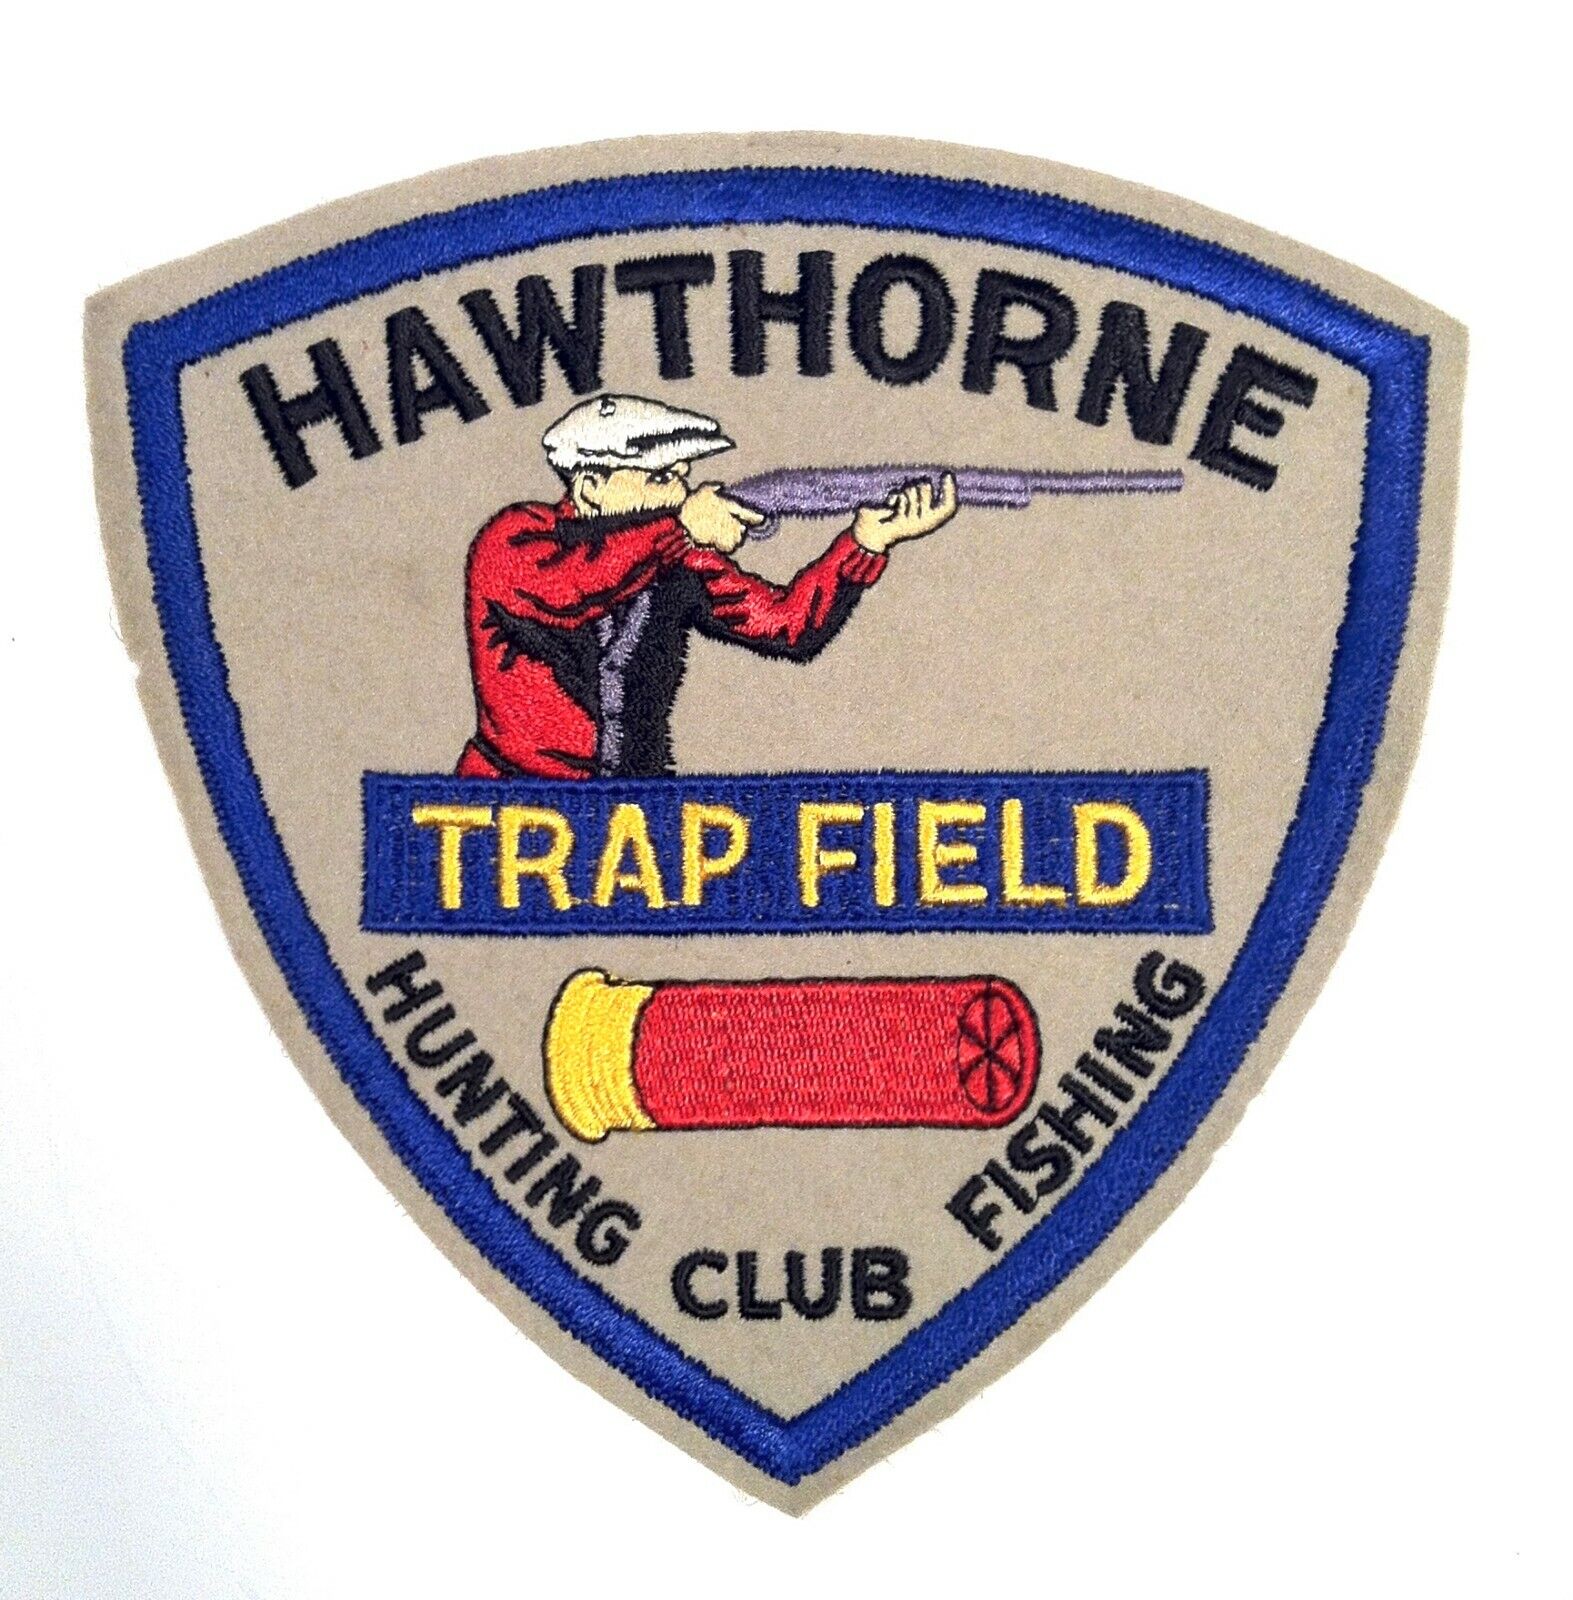 Vintage 1930’s Western Electric Telephone Hawthorne Works Club Patch RARE 